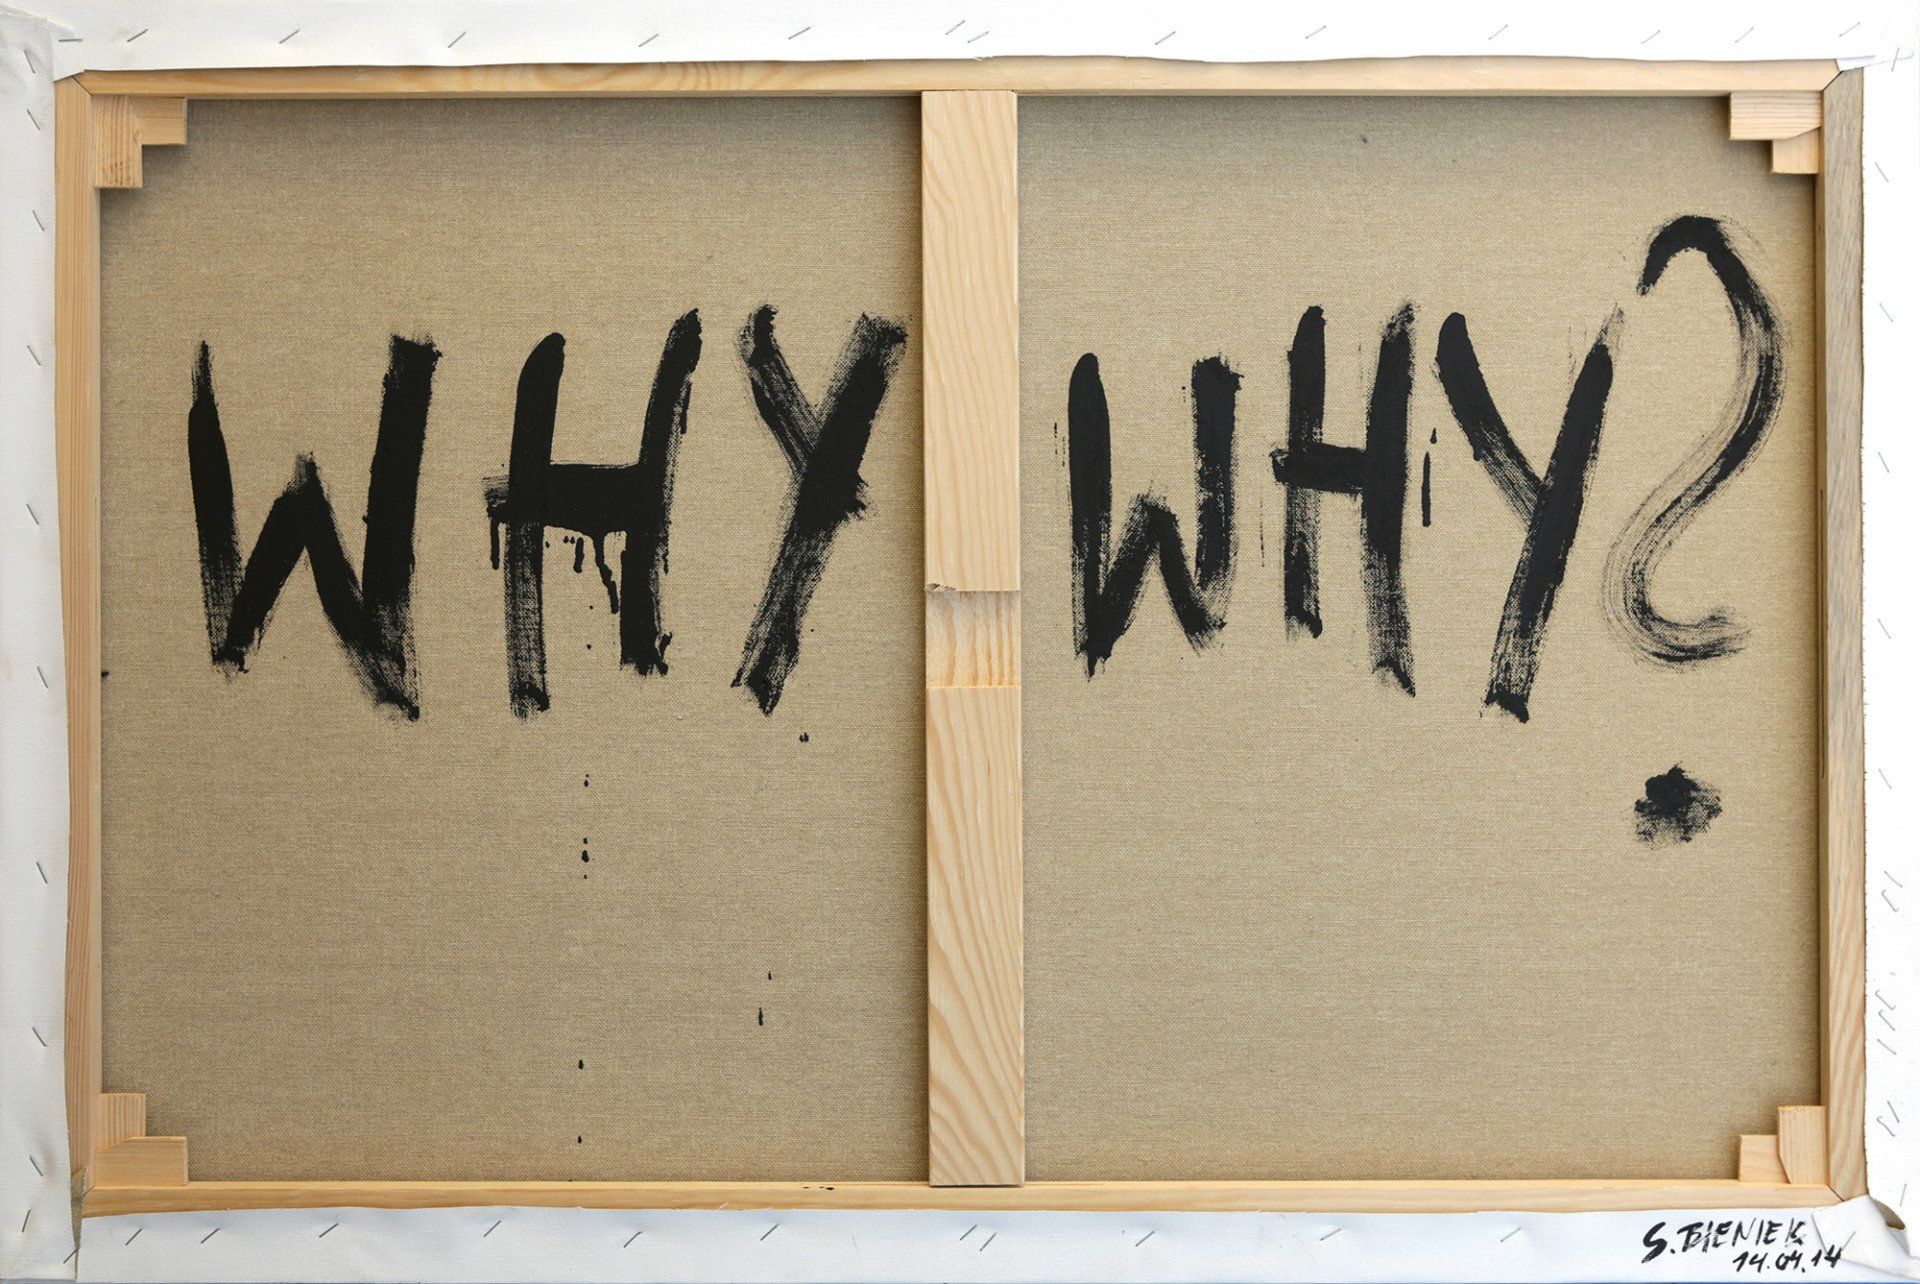 „Why why?“ by Sebastian Bieniek (B1EN1EK), 2014. Oil on back of canvas. 50 cm. x 70 cm. From the oeuvre of Bieniek-Text and part of the 